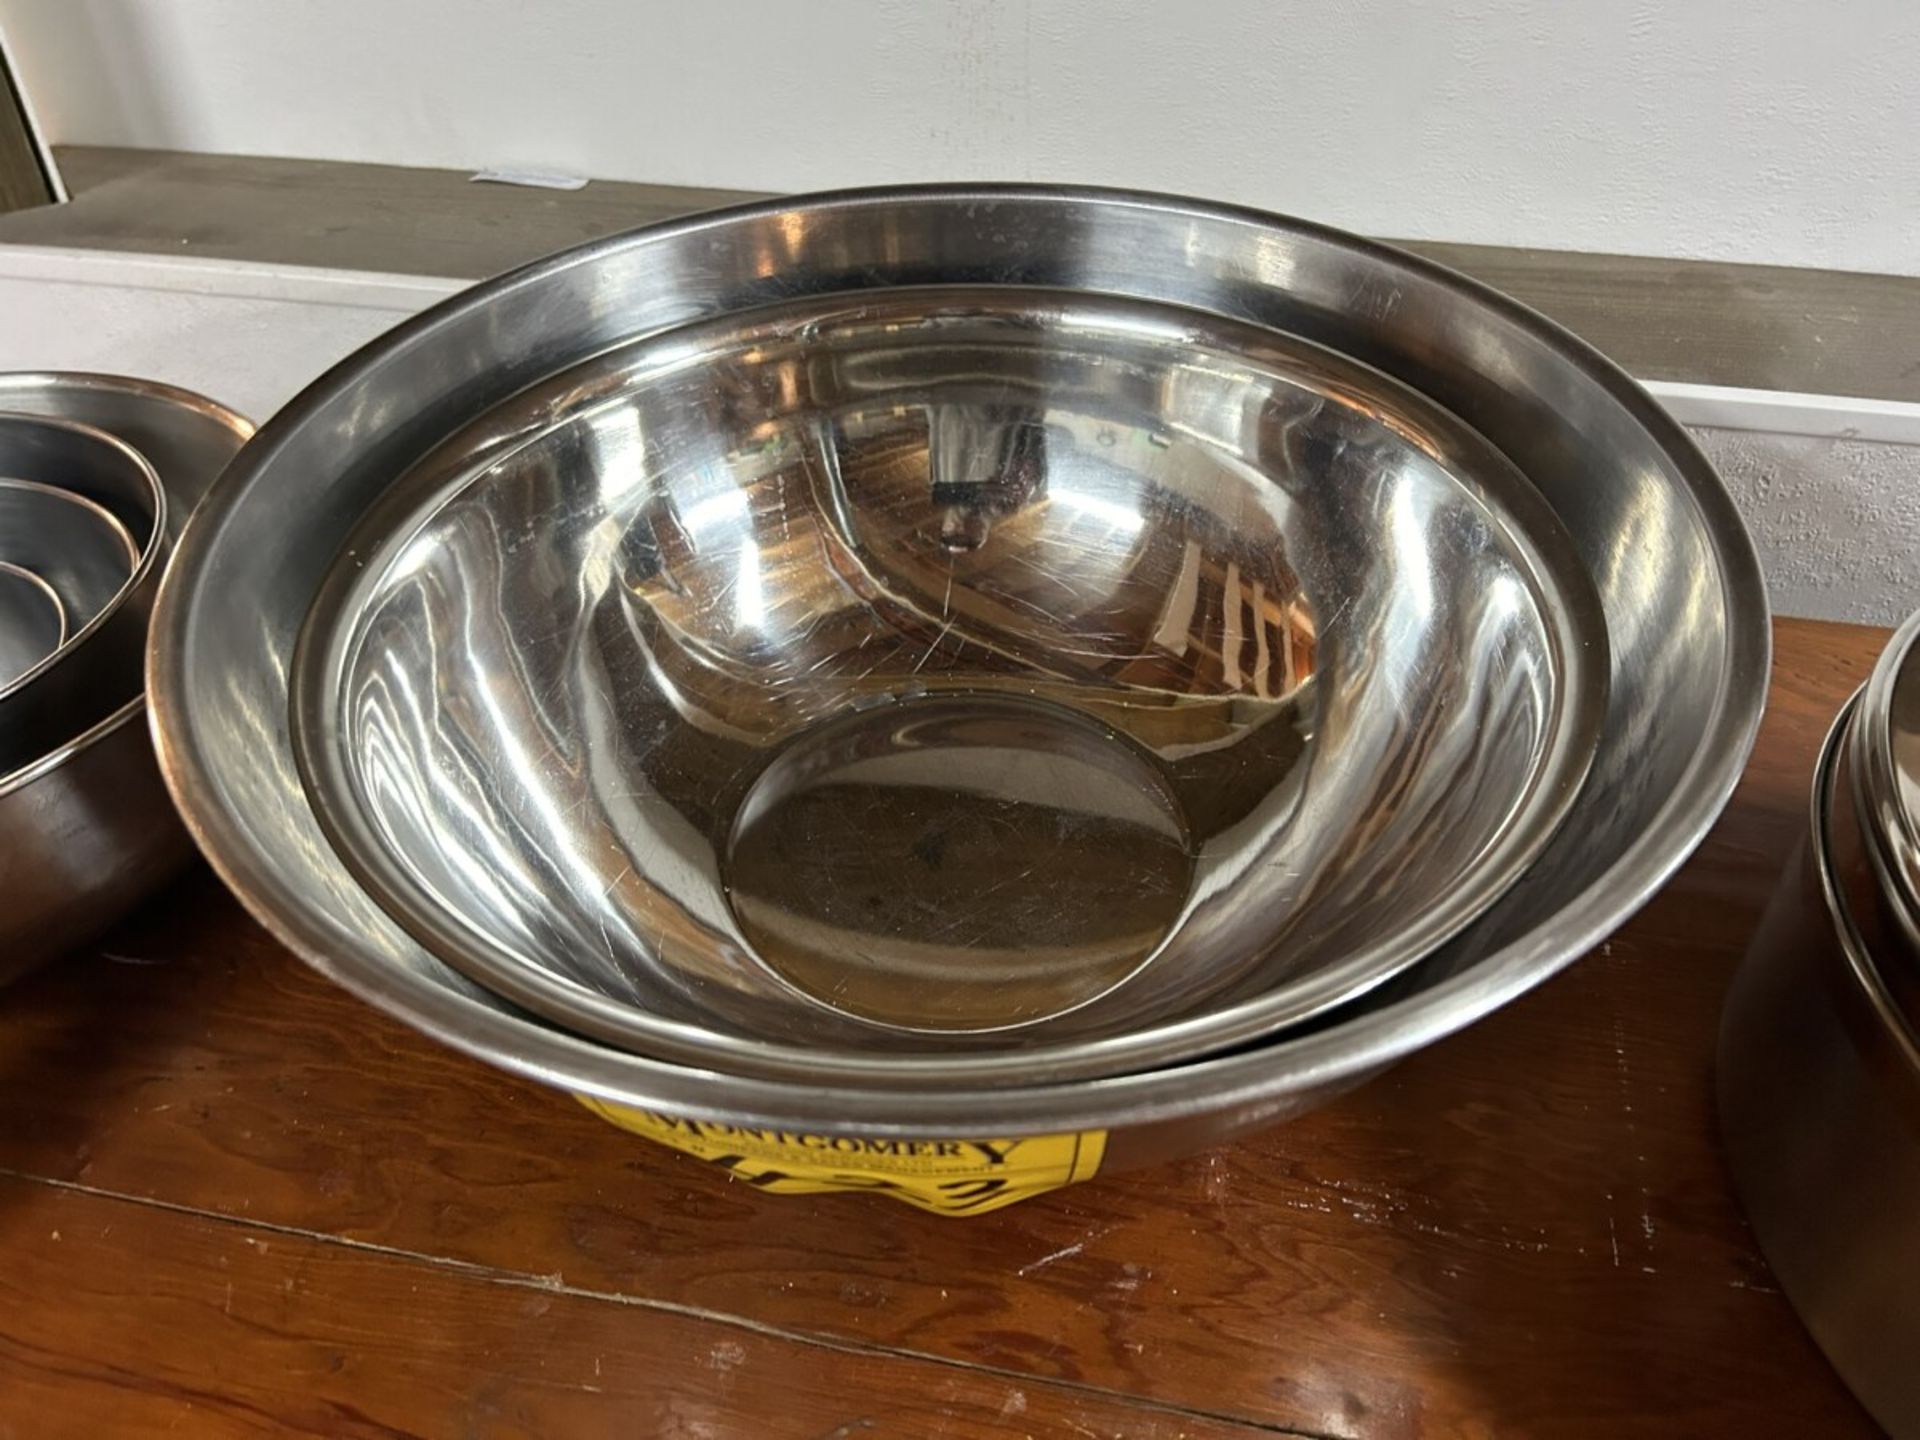 L/O ASSORTED STAINLESS STEEL BOWLS, STANLESS STEEL STACKING TINS - Image 3 of 4